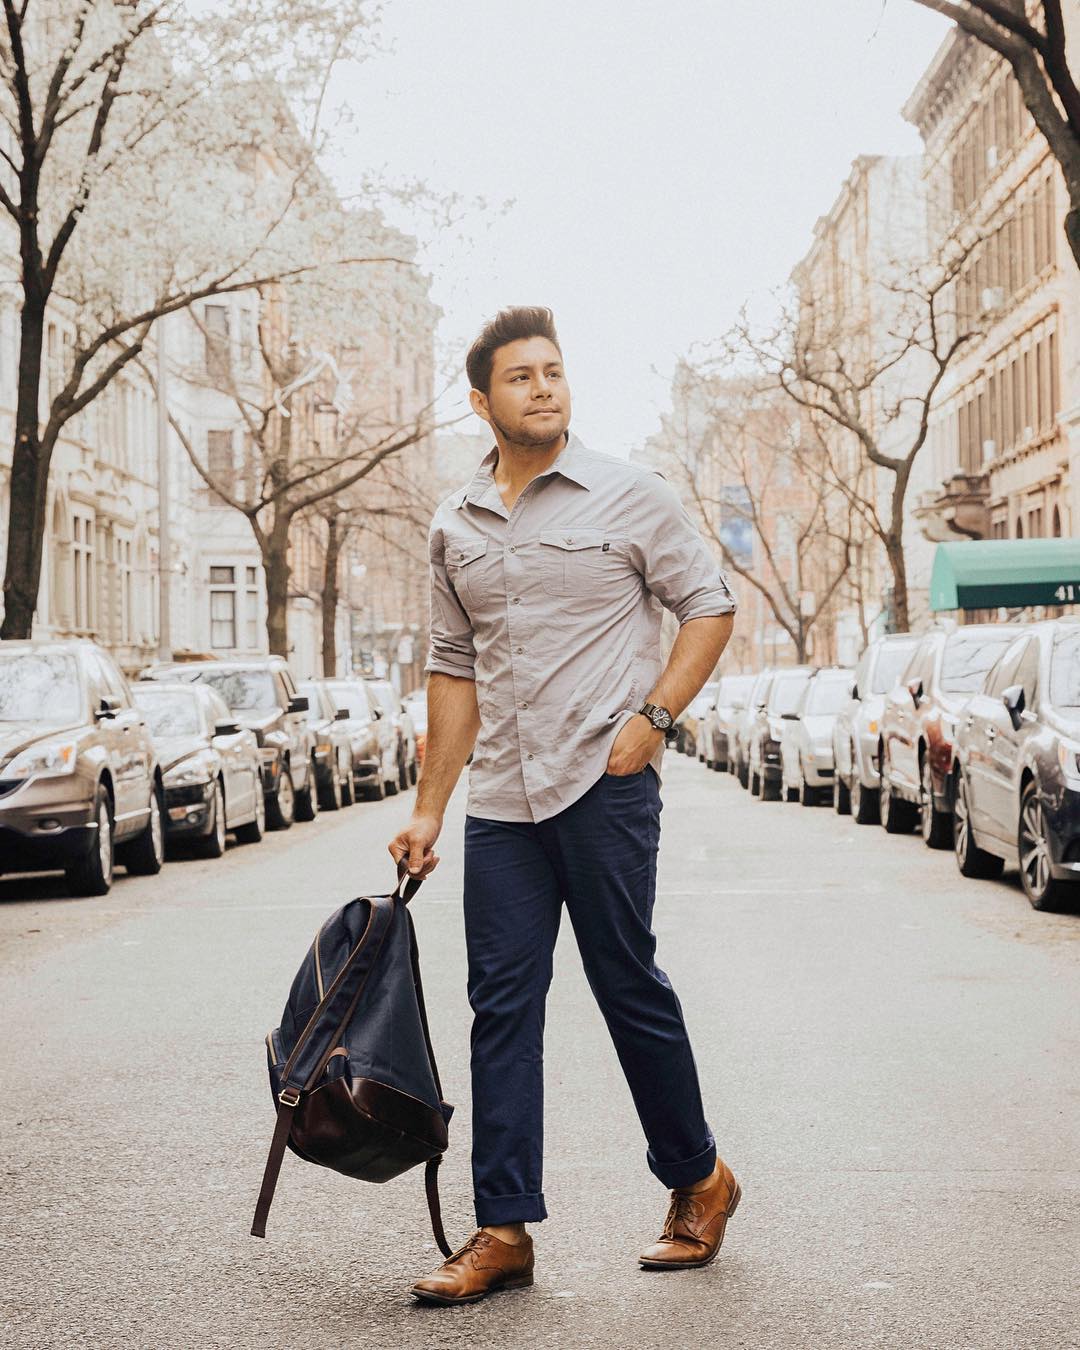 Chinos: How to Wear Them Well - navy chinos - blue chinos - casual chinos - how to wear chinos - smart casual chinos - casual chinos - how to style chinos - how to wear chinos - colorful chinos - dandy in the bronx - smart casual chinos - untucked shirt and chinos - united by blue outfit 